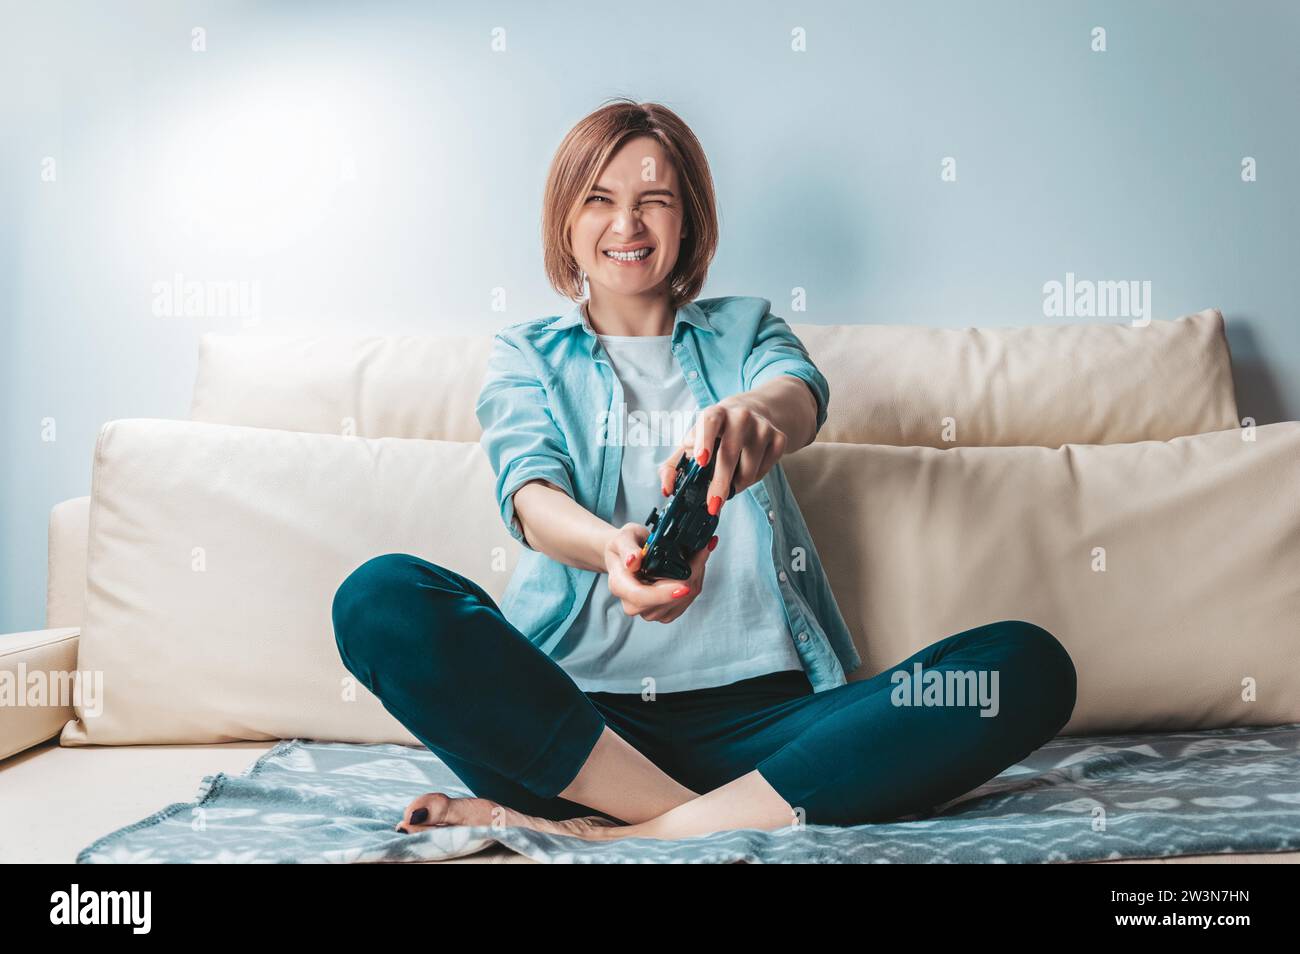 Girl with a joystick in her hands enthusiastically plays a computer game. ESports concept. Mixed media Stock Photo